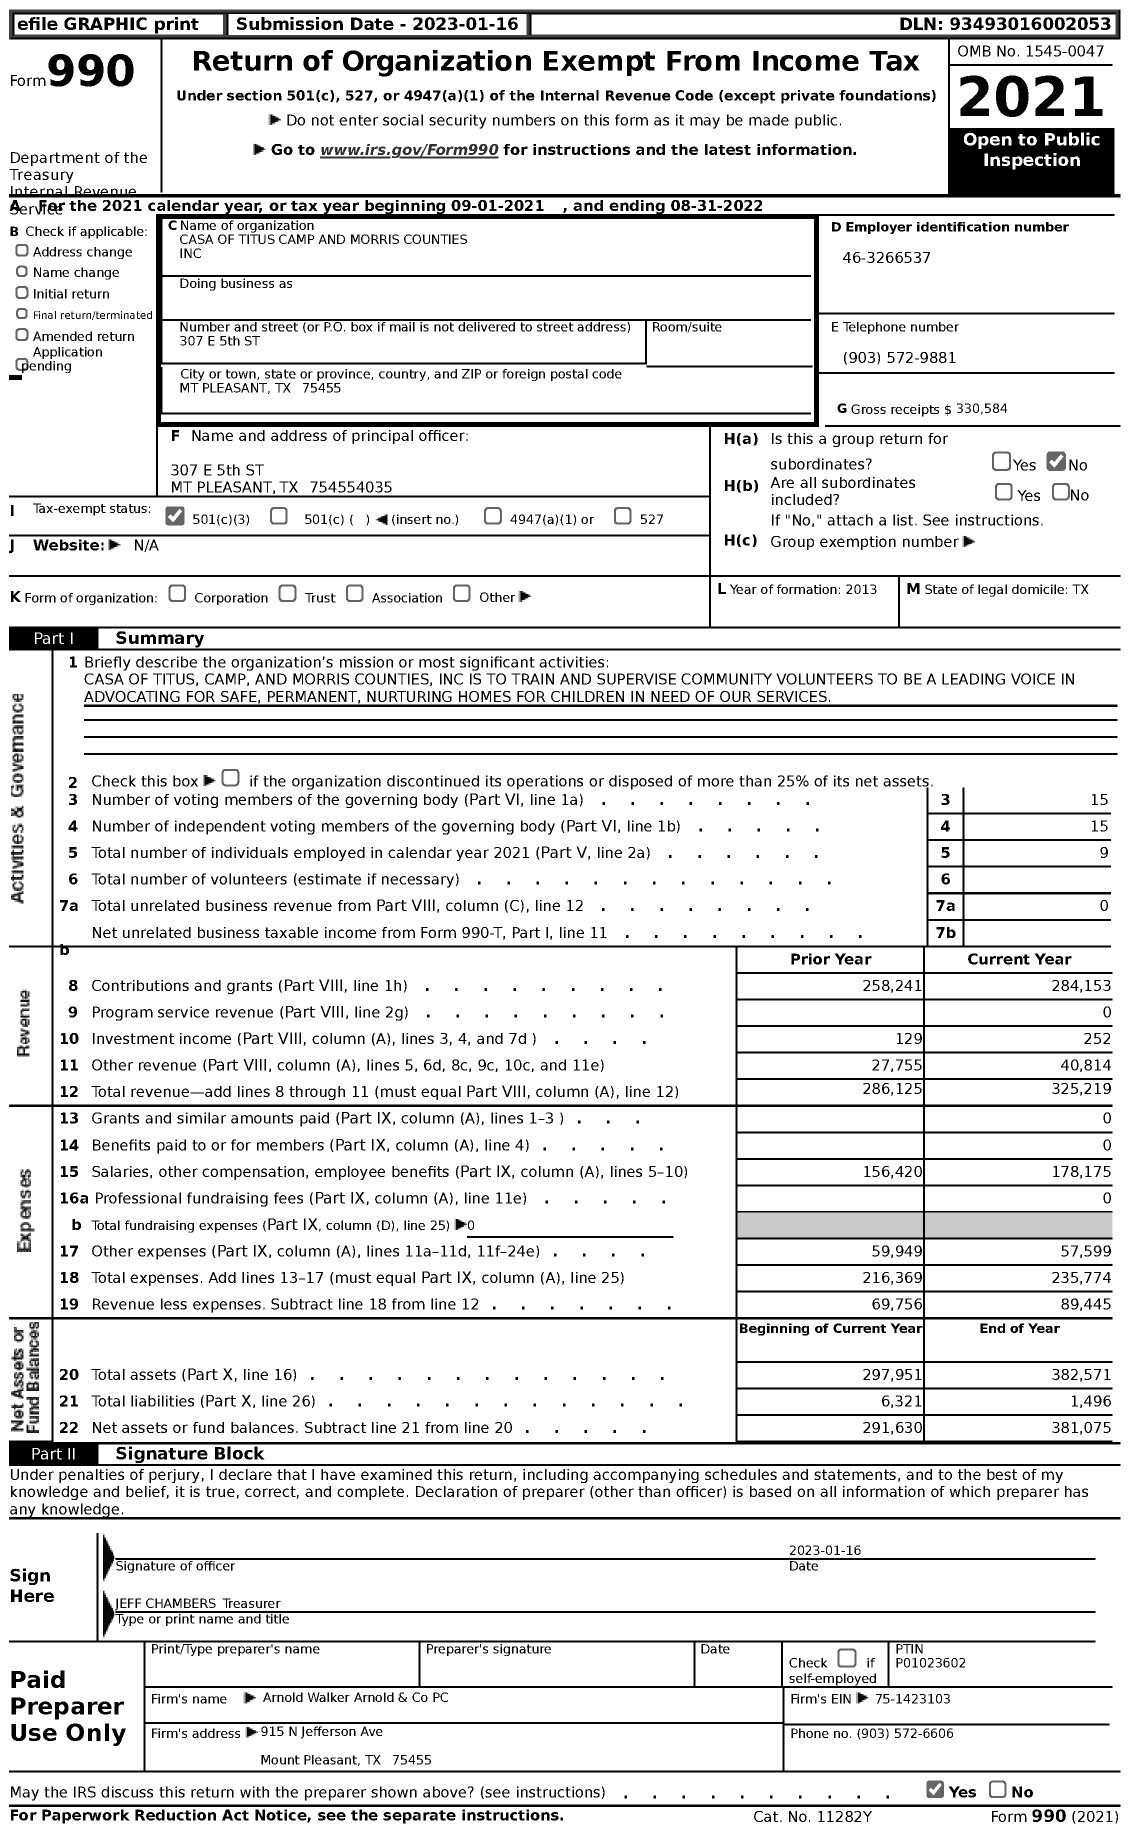 Image of first page of 2021 Form 990 for Casa of Titus Camp and Morris Counties